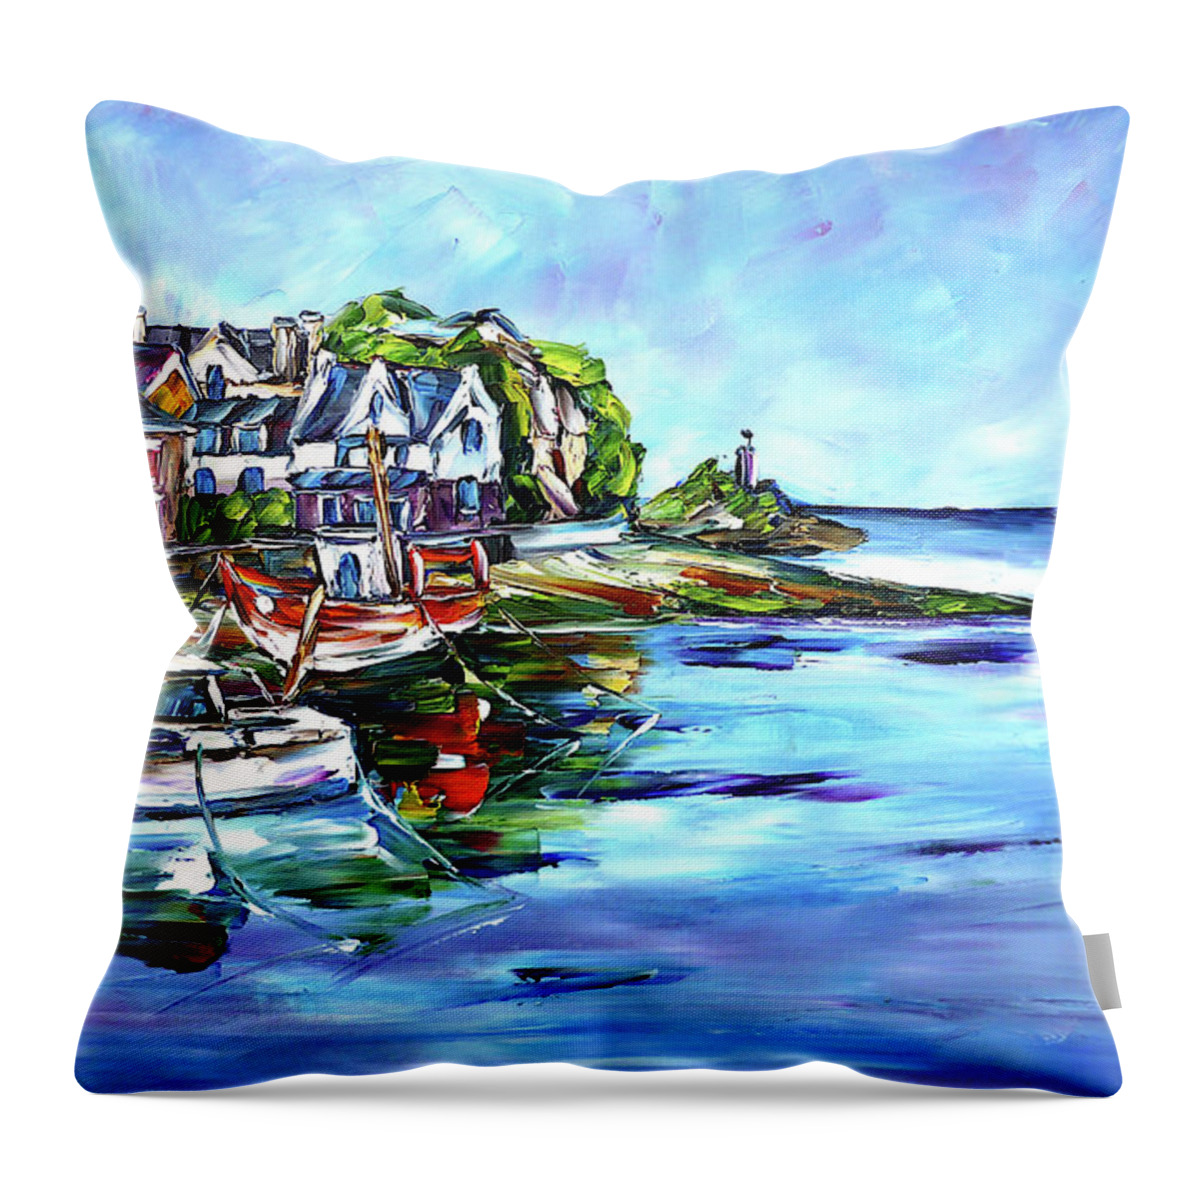 Loguivy De La Mer Throw Pillow featuring the painting The Islands Of Brittany by Mirek Kuzniar